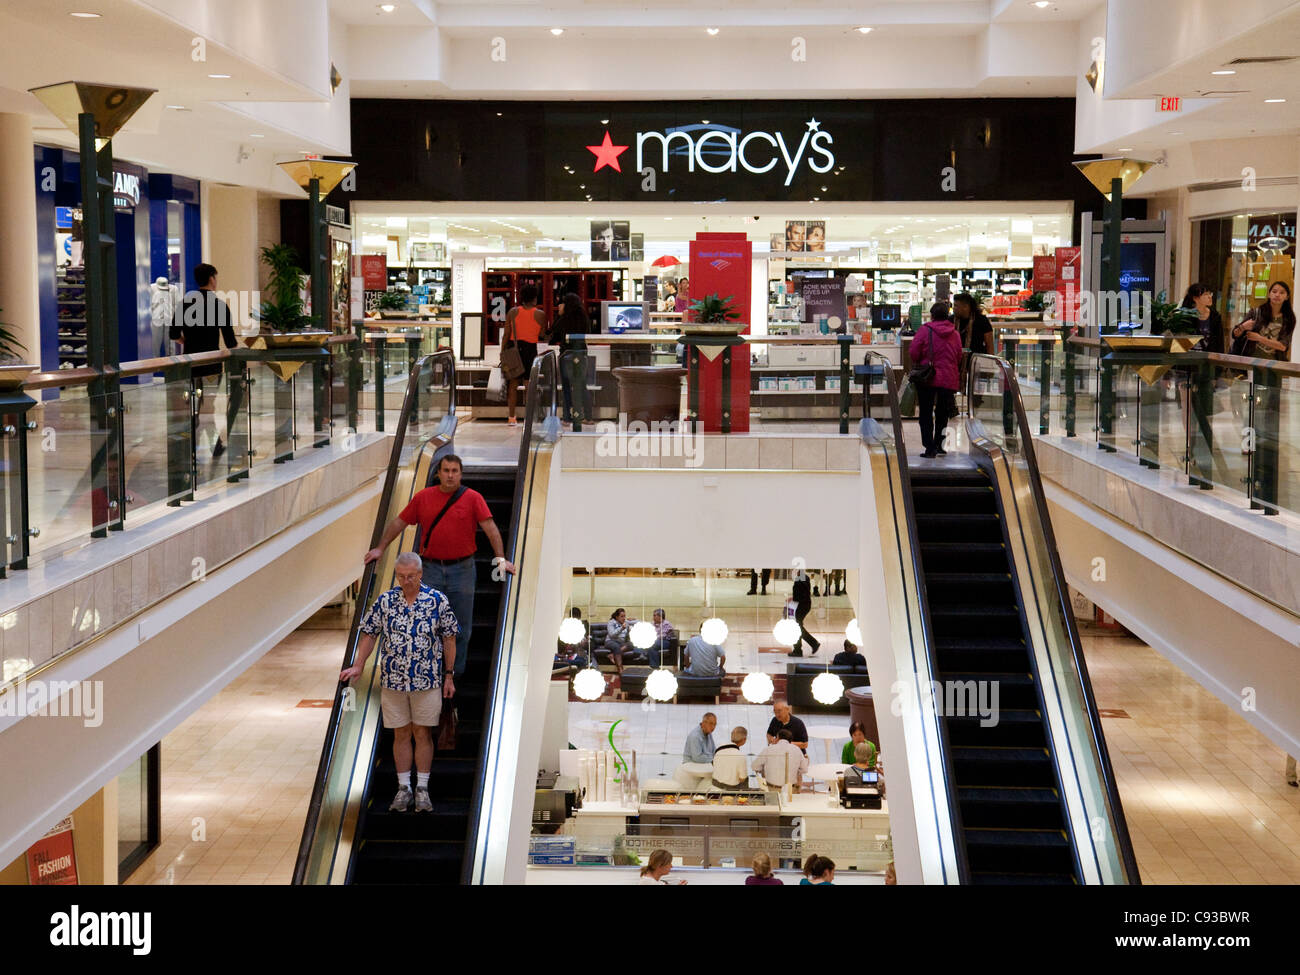 Macy's department store, Montgomery shopping mall, Washington DC USA Banque D'Images